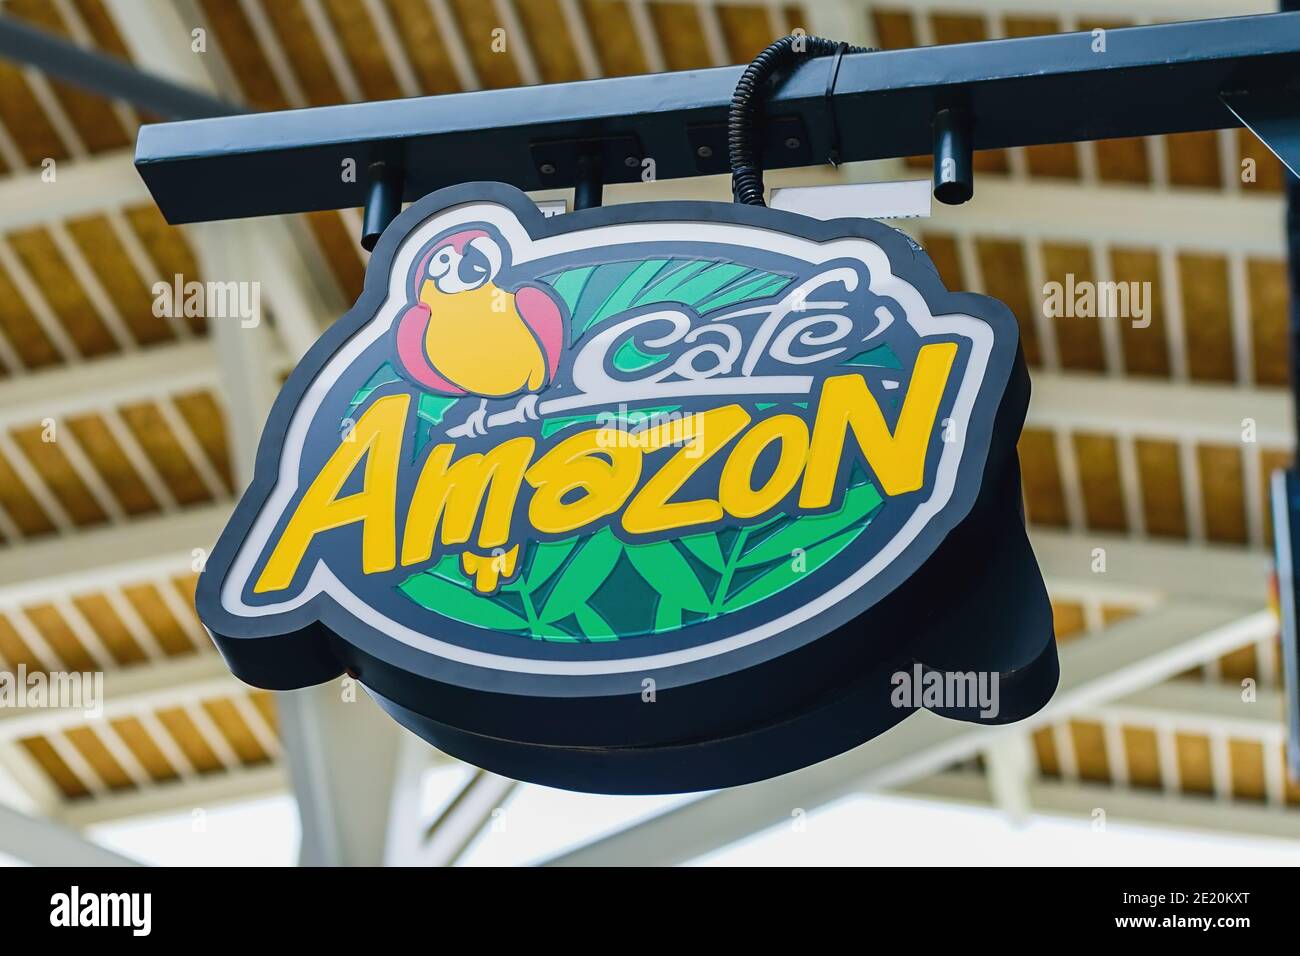 Samut Prakan, Thailand - November 02, 2020: Cafe Amazon Coffee shop in Siam Premium Outlets Bangkok. This is a famous Thai brand coffee shop in Thaila Stock Photo